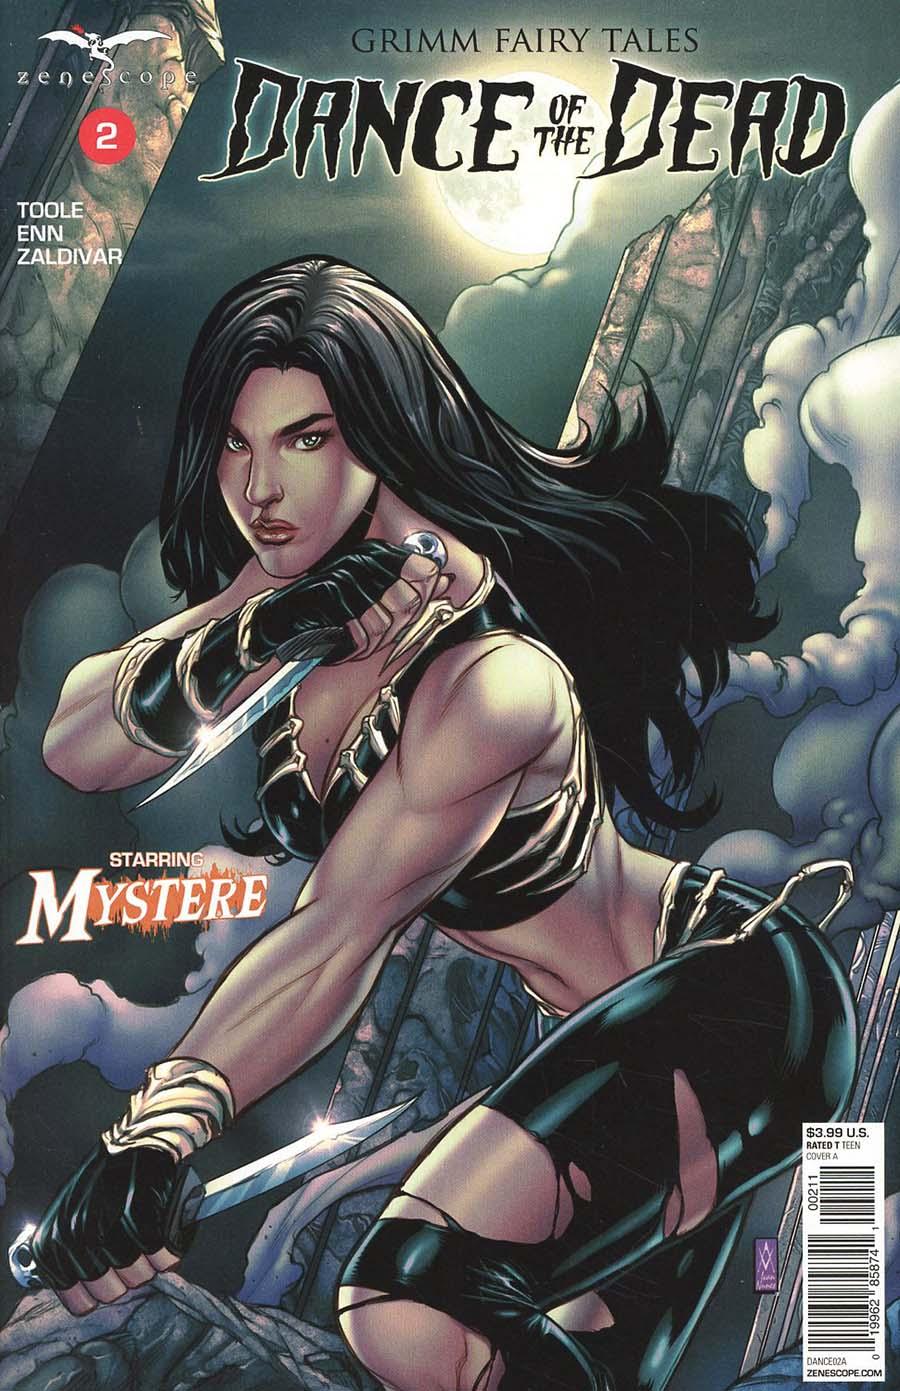 Grimm Fairy Tales Presents Dance Of The Dead Vol. 1 #2